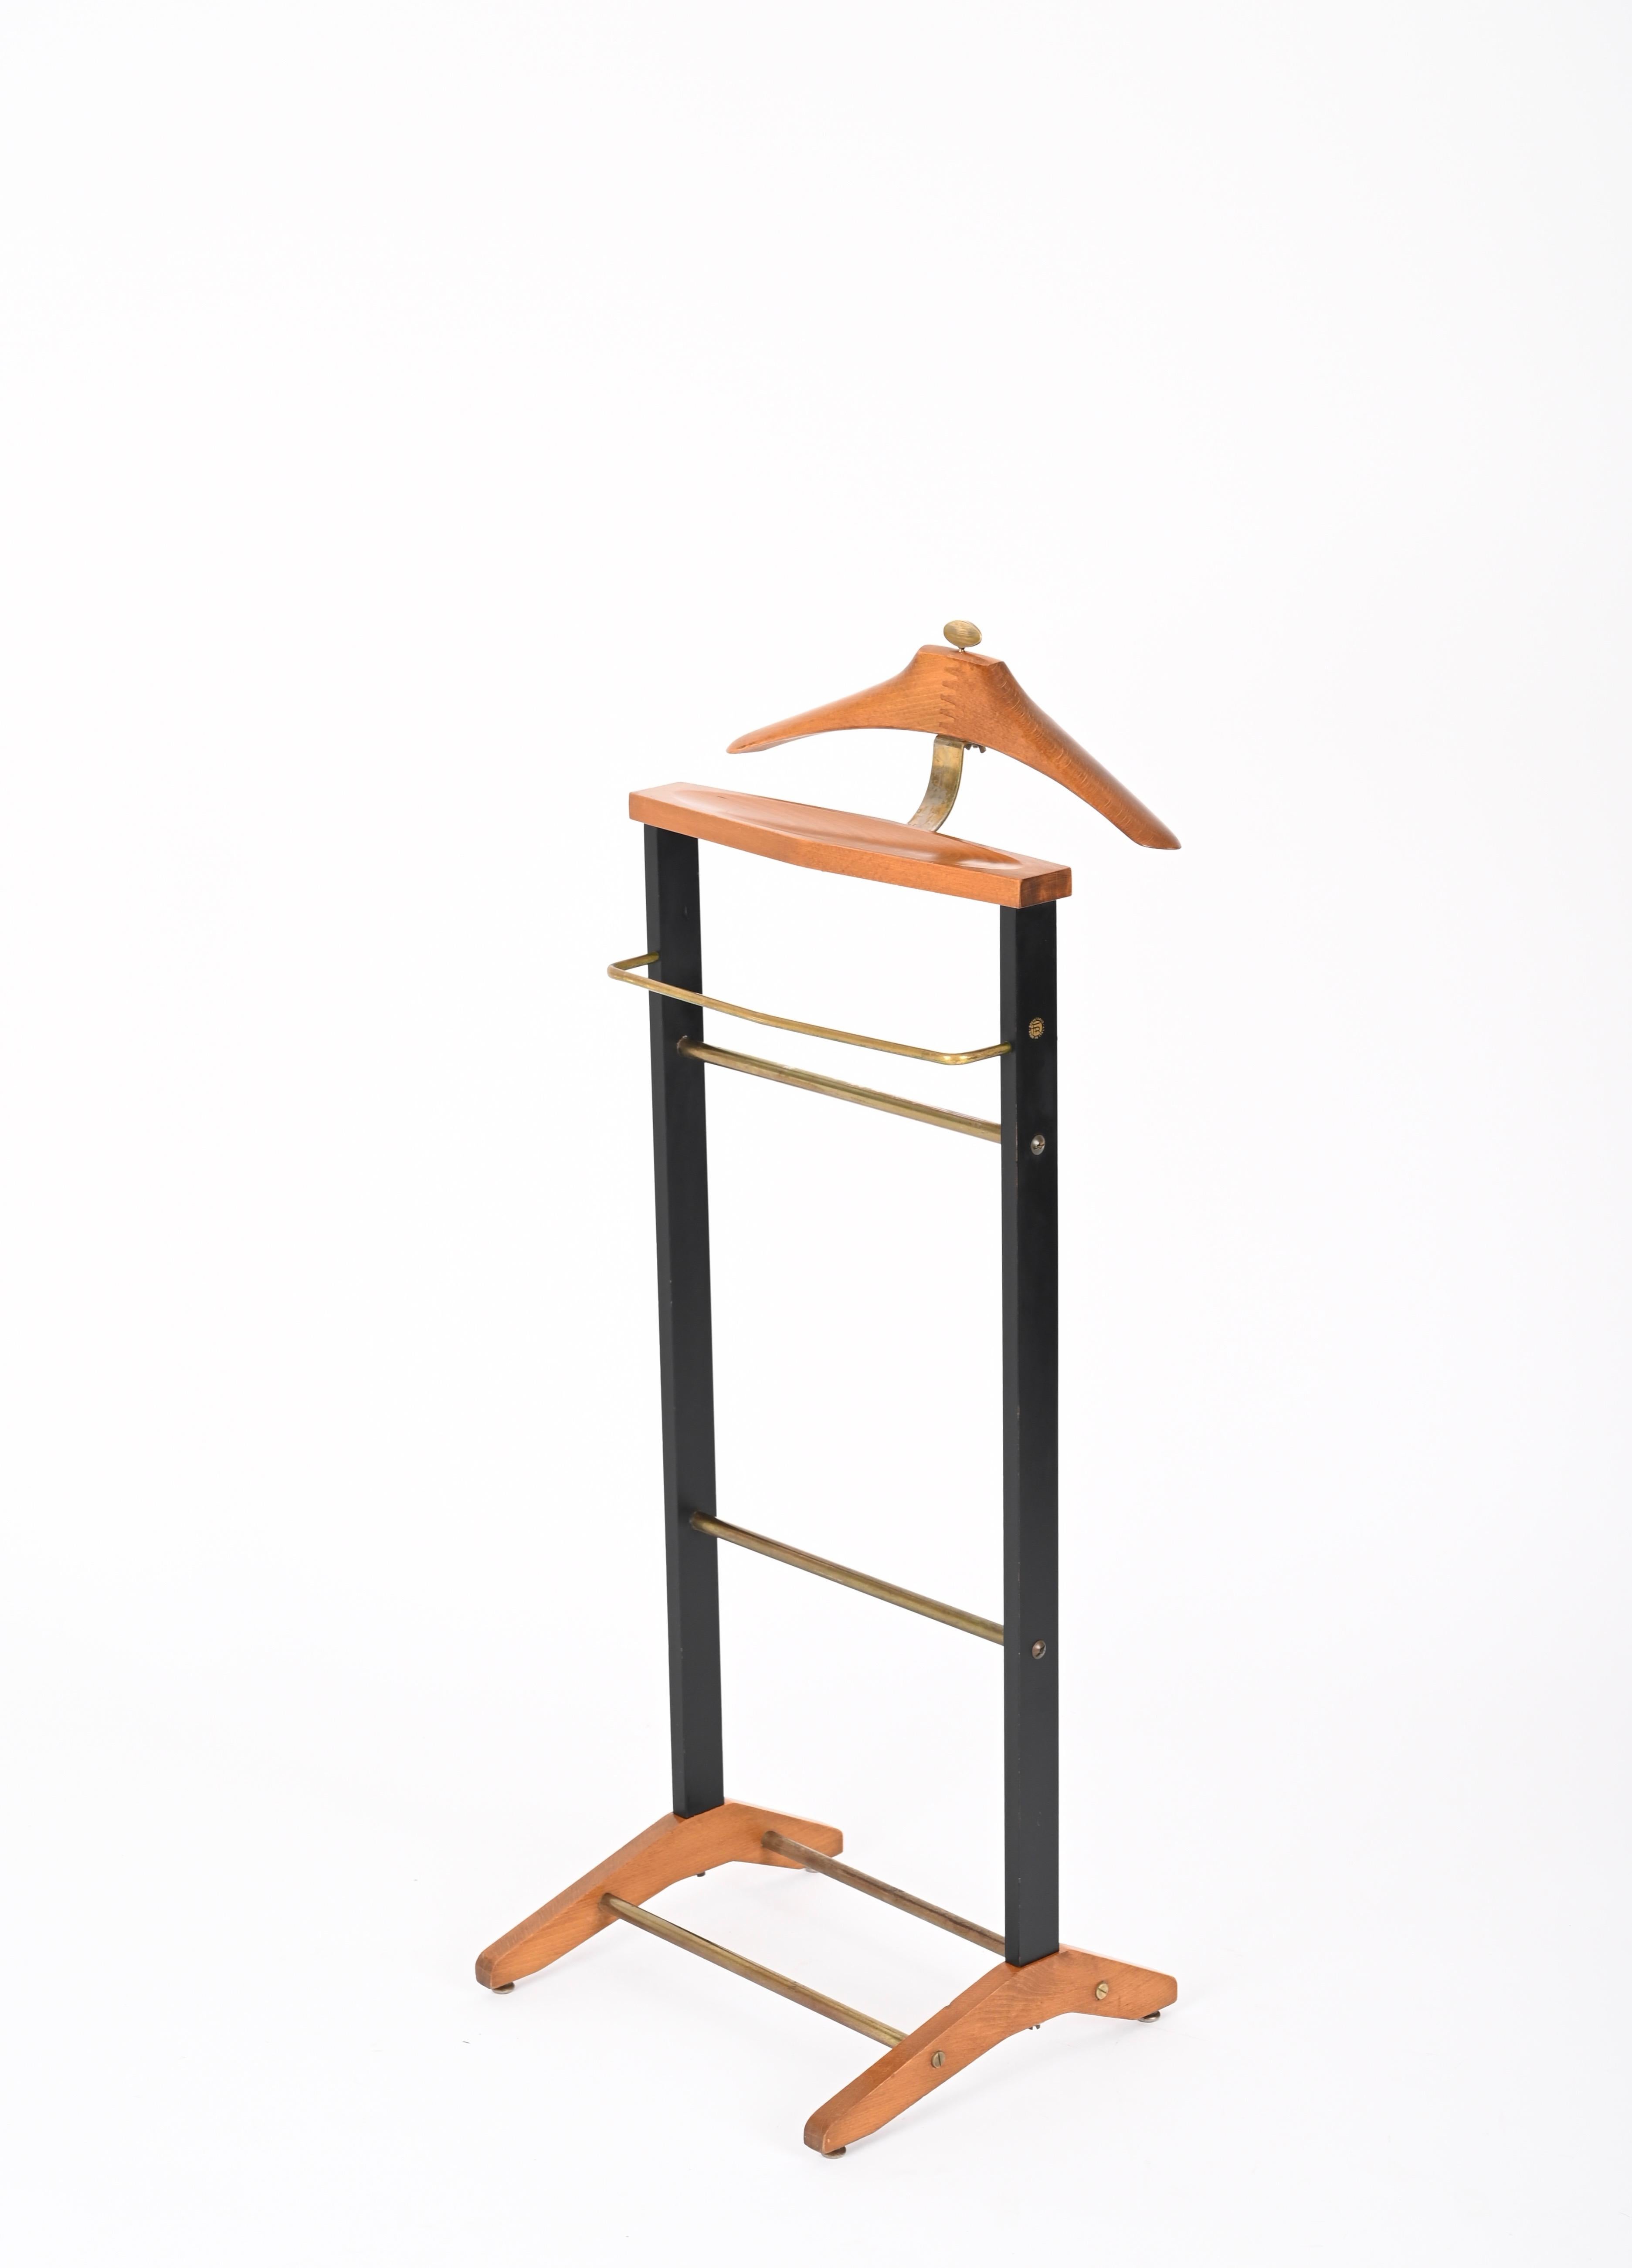 Ico Parisi Valet Beech and Brass Coat Stand for Fratelli Reguitti, Italy 1960s For Sale 3